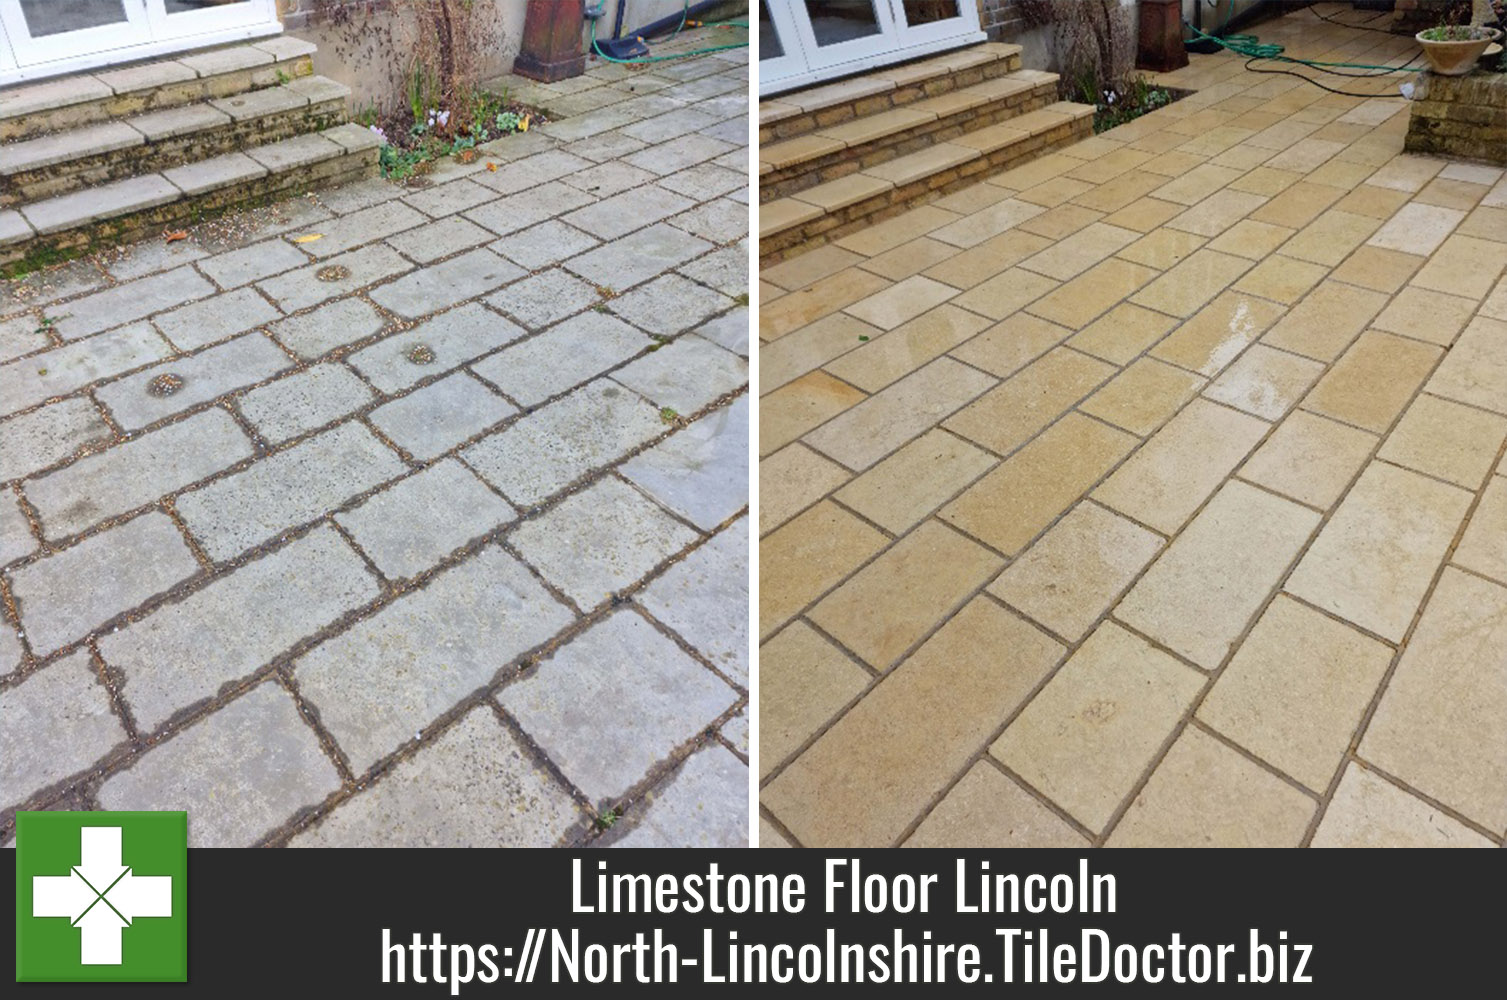 Removing Lichen from a Limestone Patio with Tile Doctor Patio & Driveway Cleaner in Lincoln